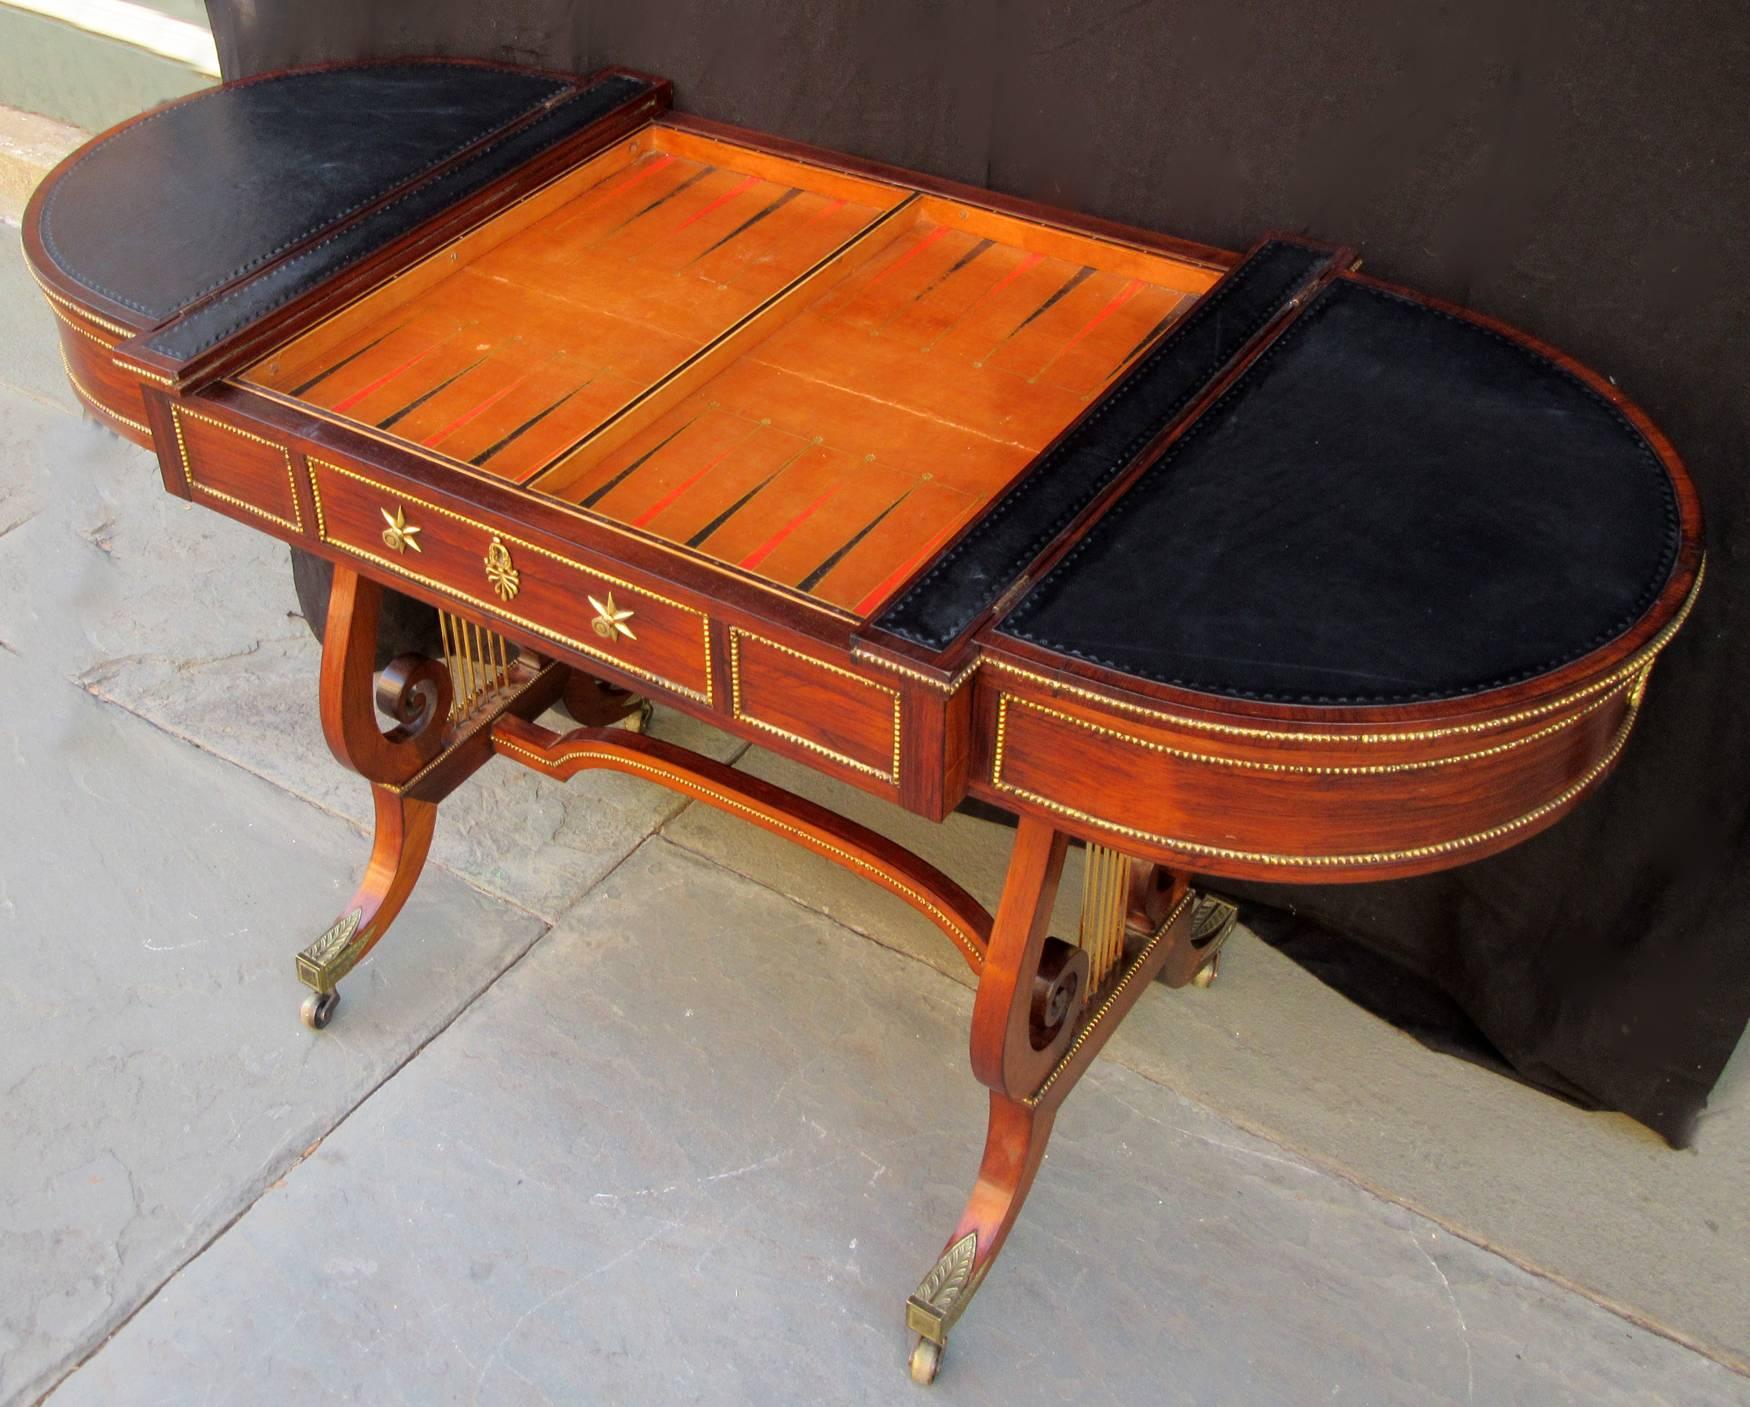 A fine Regency Rosewood sofa gaming table attributed to noted English furniture maker Gillows of Lancaster & London, circa 1815, featuring its original reversible chess and backgammon boards, brass beadwork and lyre base with fine bronze casters.